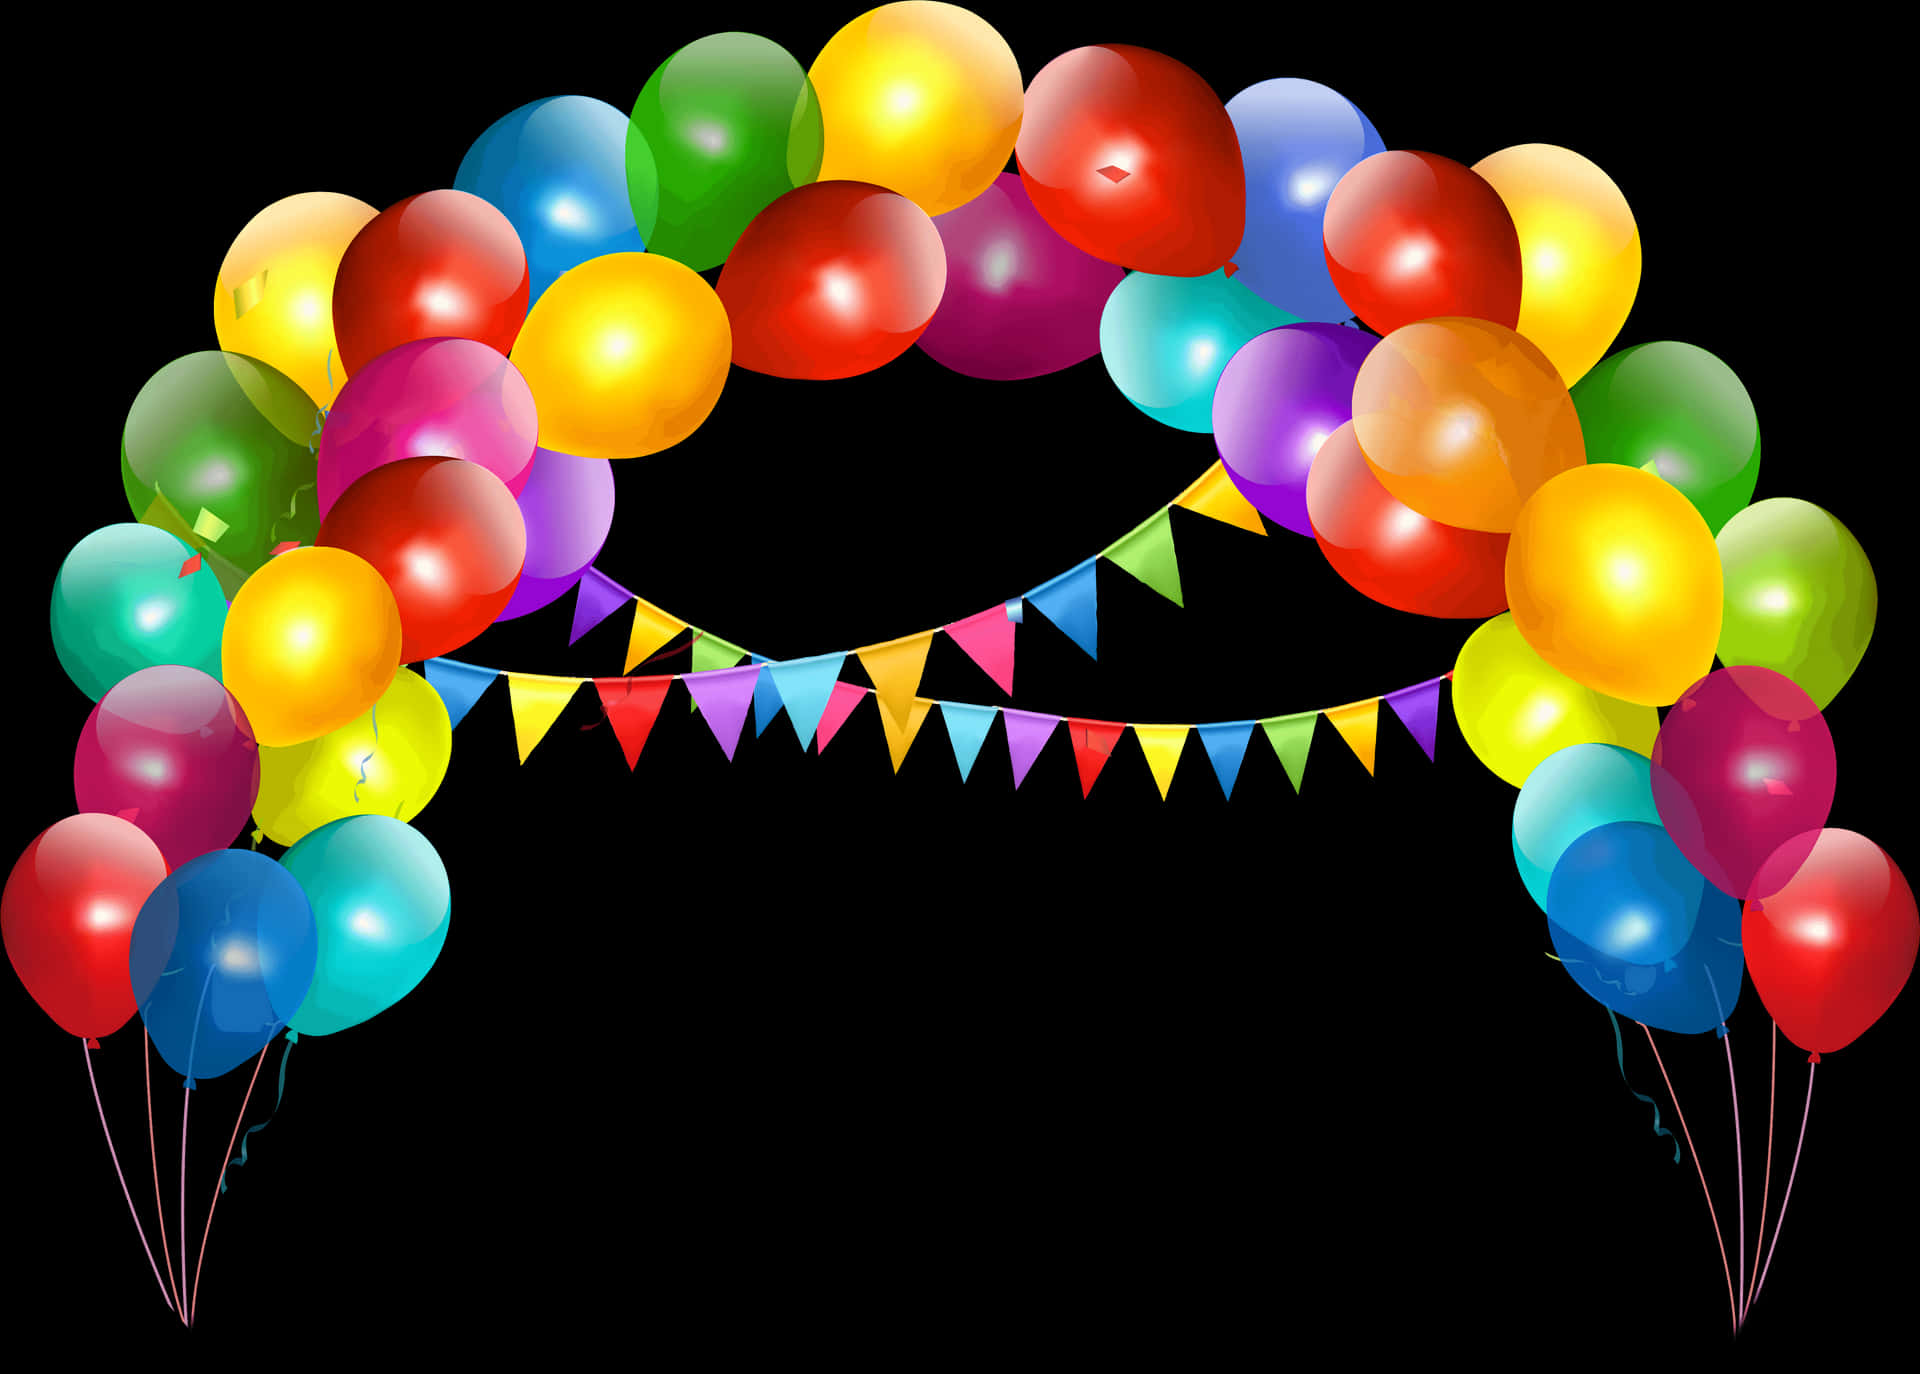 Colorful Balloon Archwith Pennants.jpg PNG